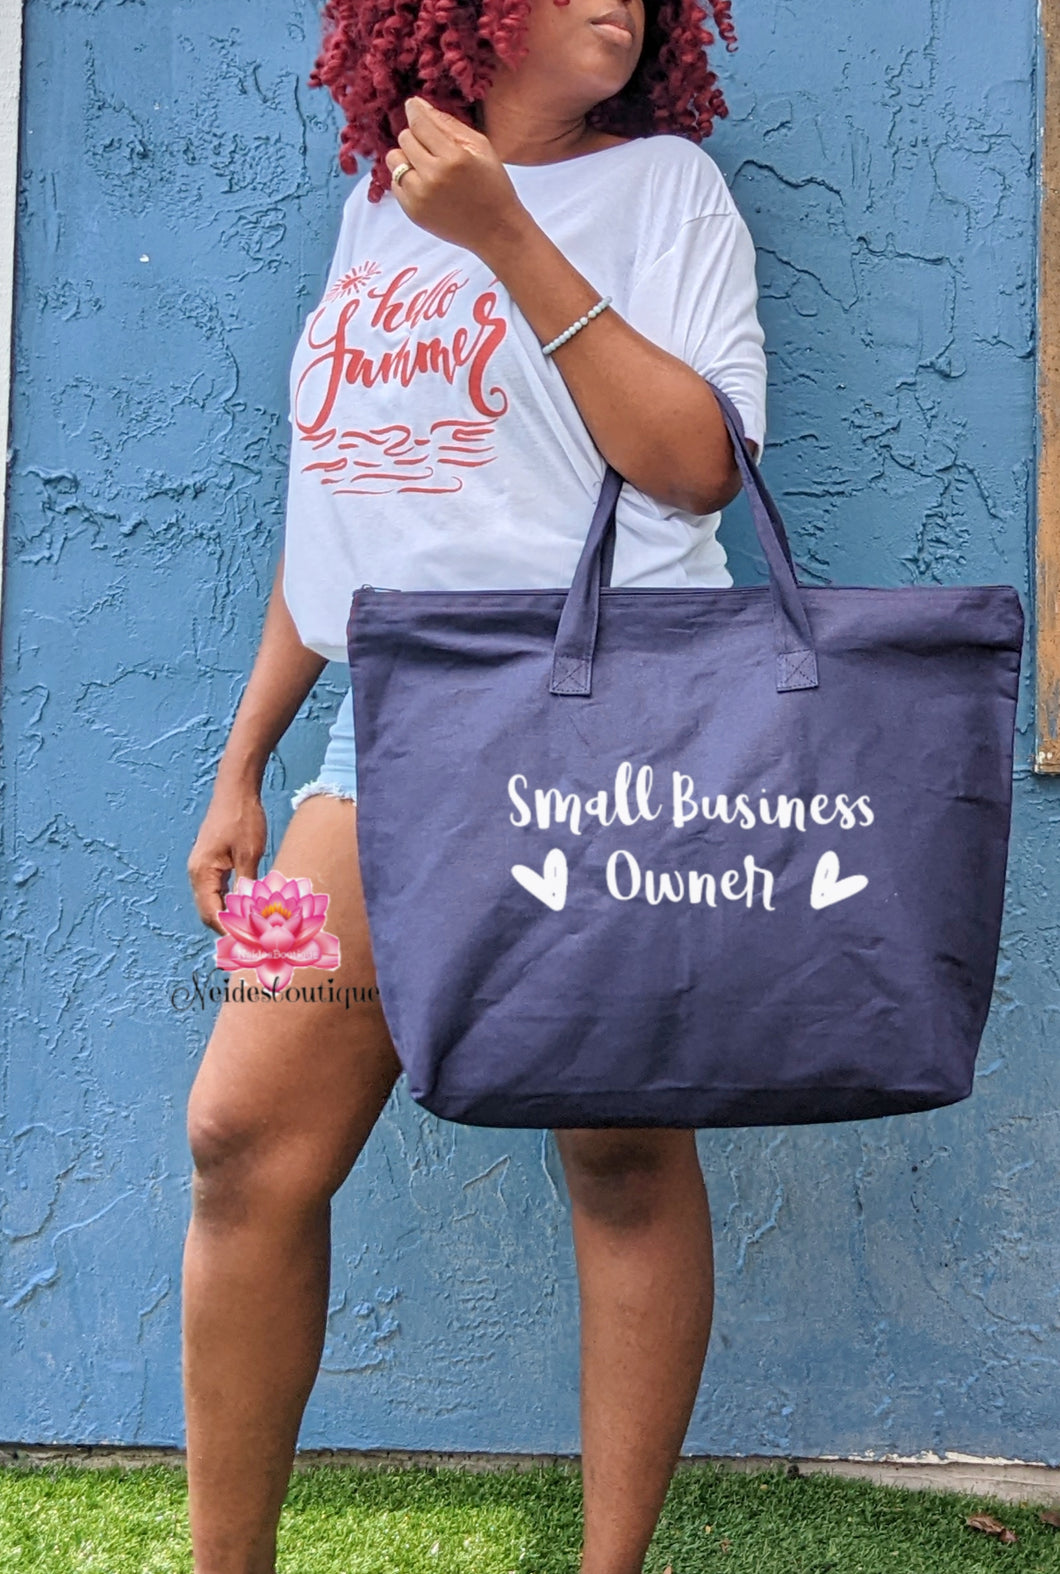 Small Business owner bag, travel tote